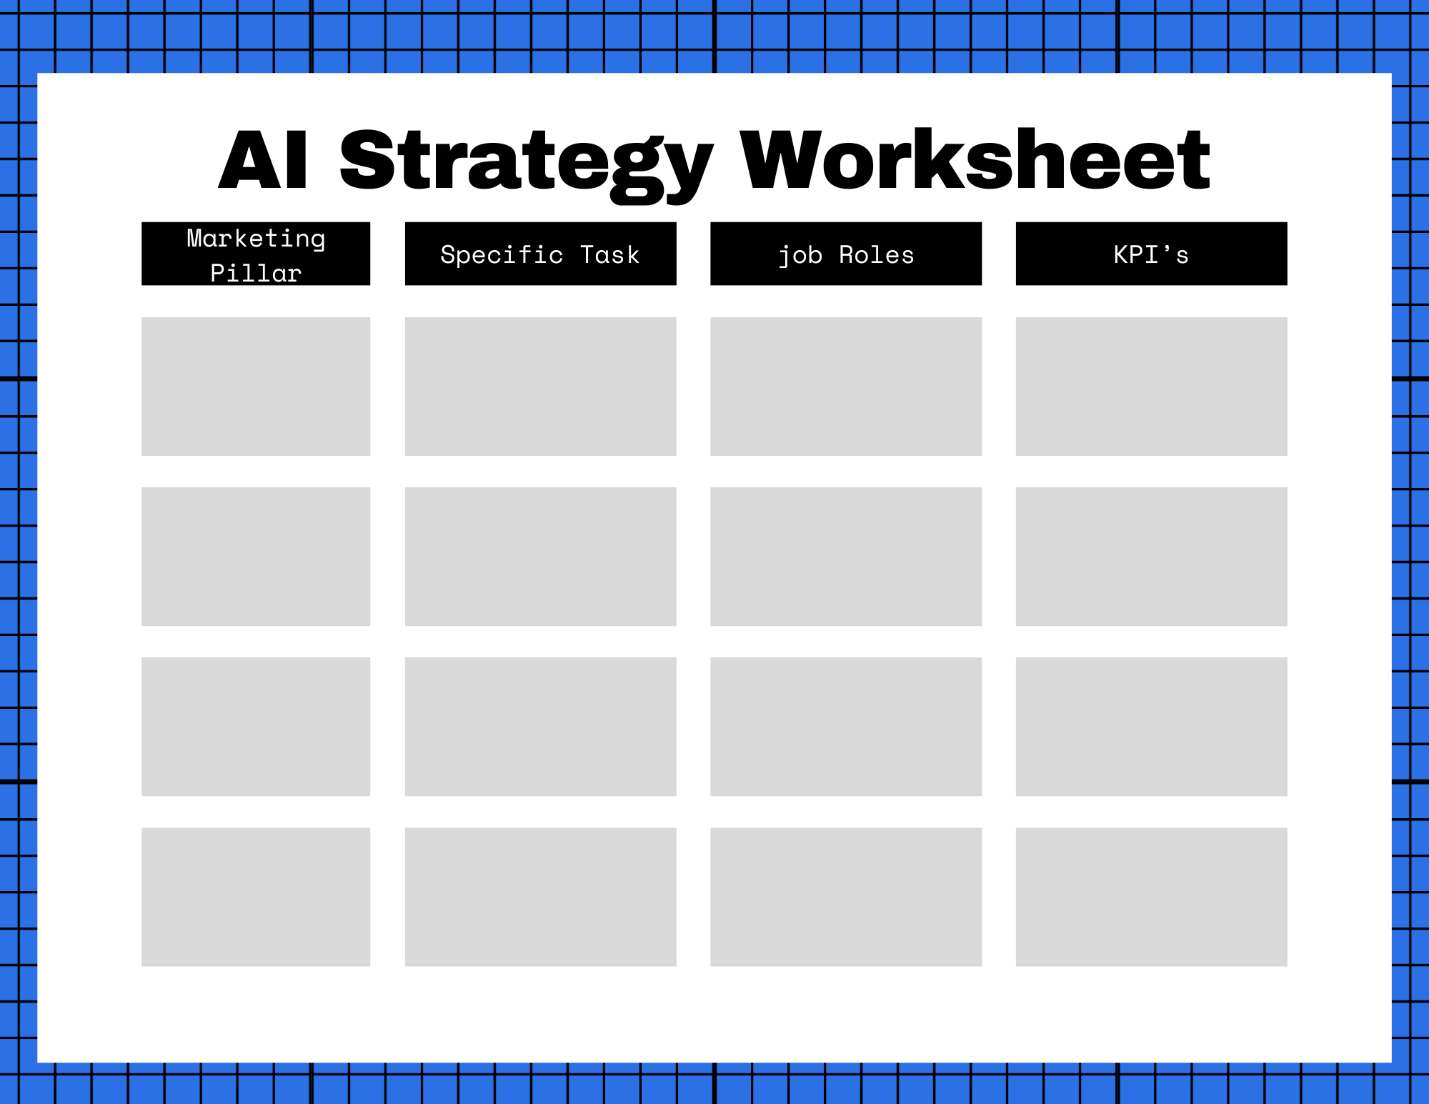 A strategy worksheet with blue grid

Description automatically generated